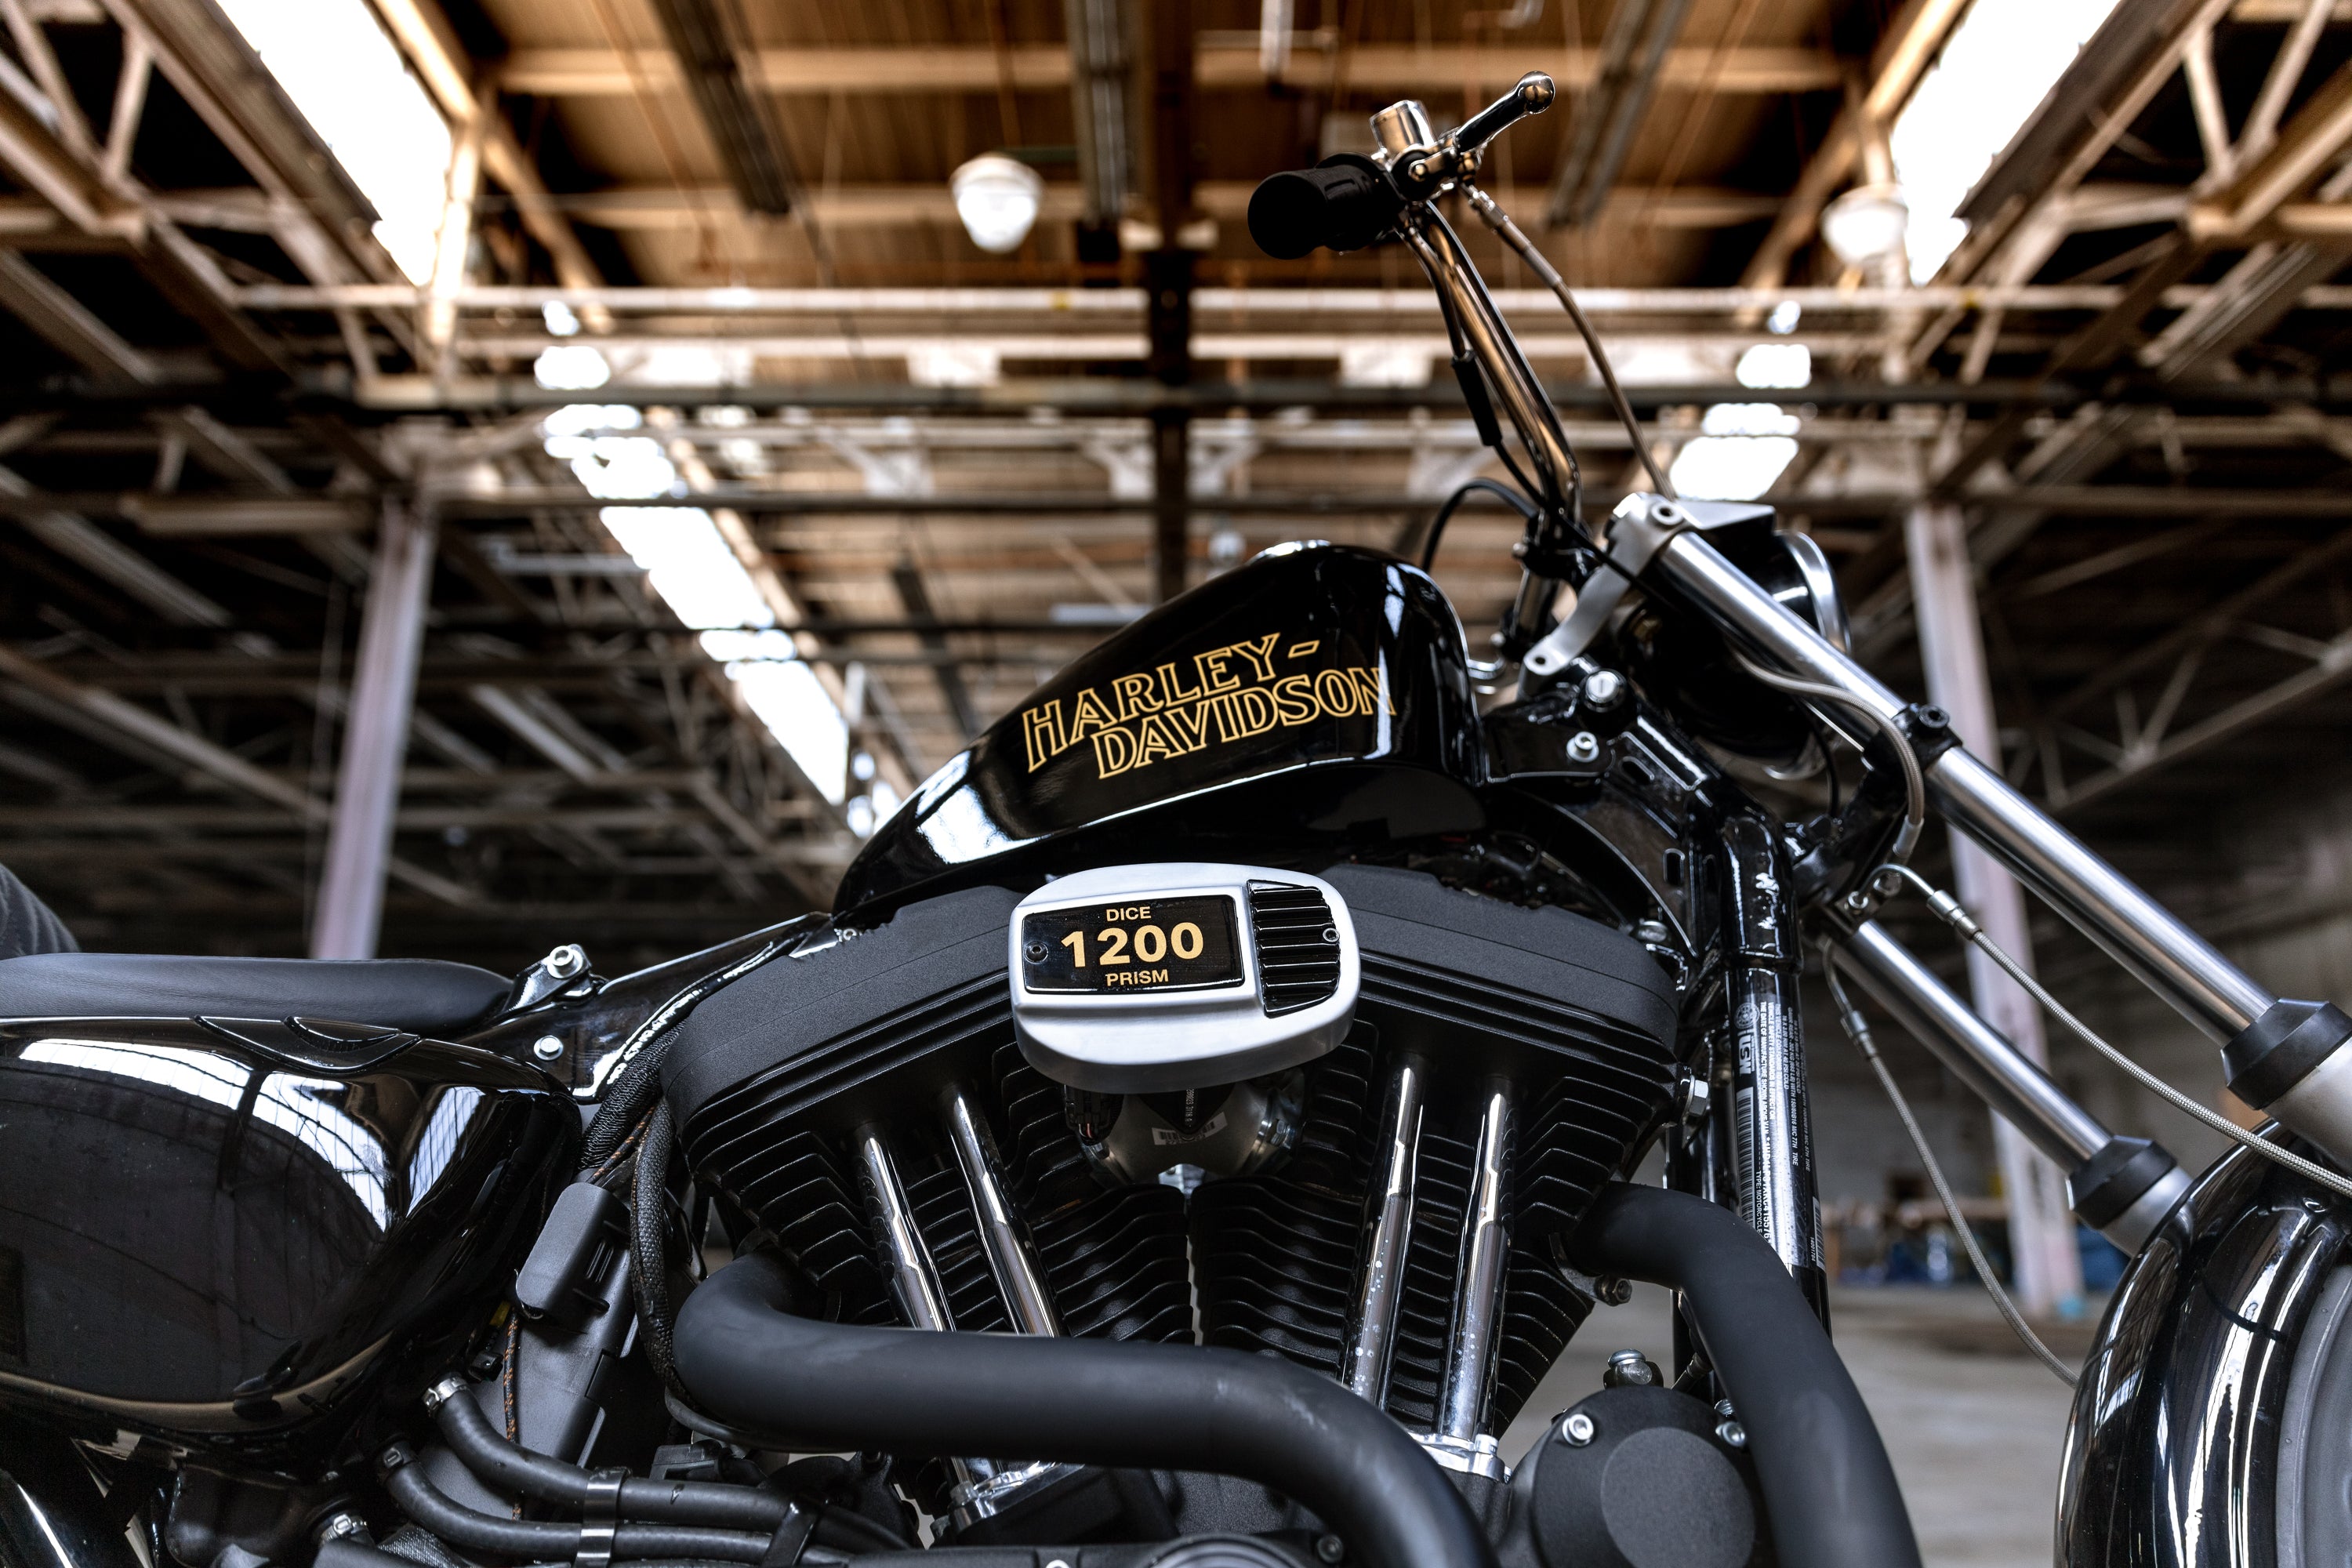 Harley Davidson x The Congregation Show - 2019 Iron 1200 Sportster Giveaway Bike Unveil 